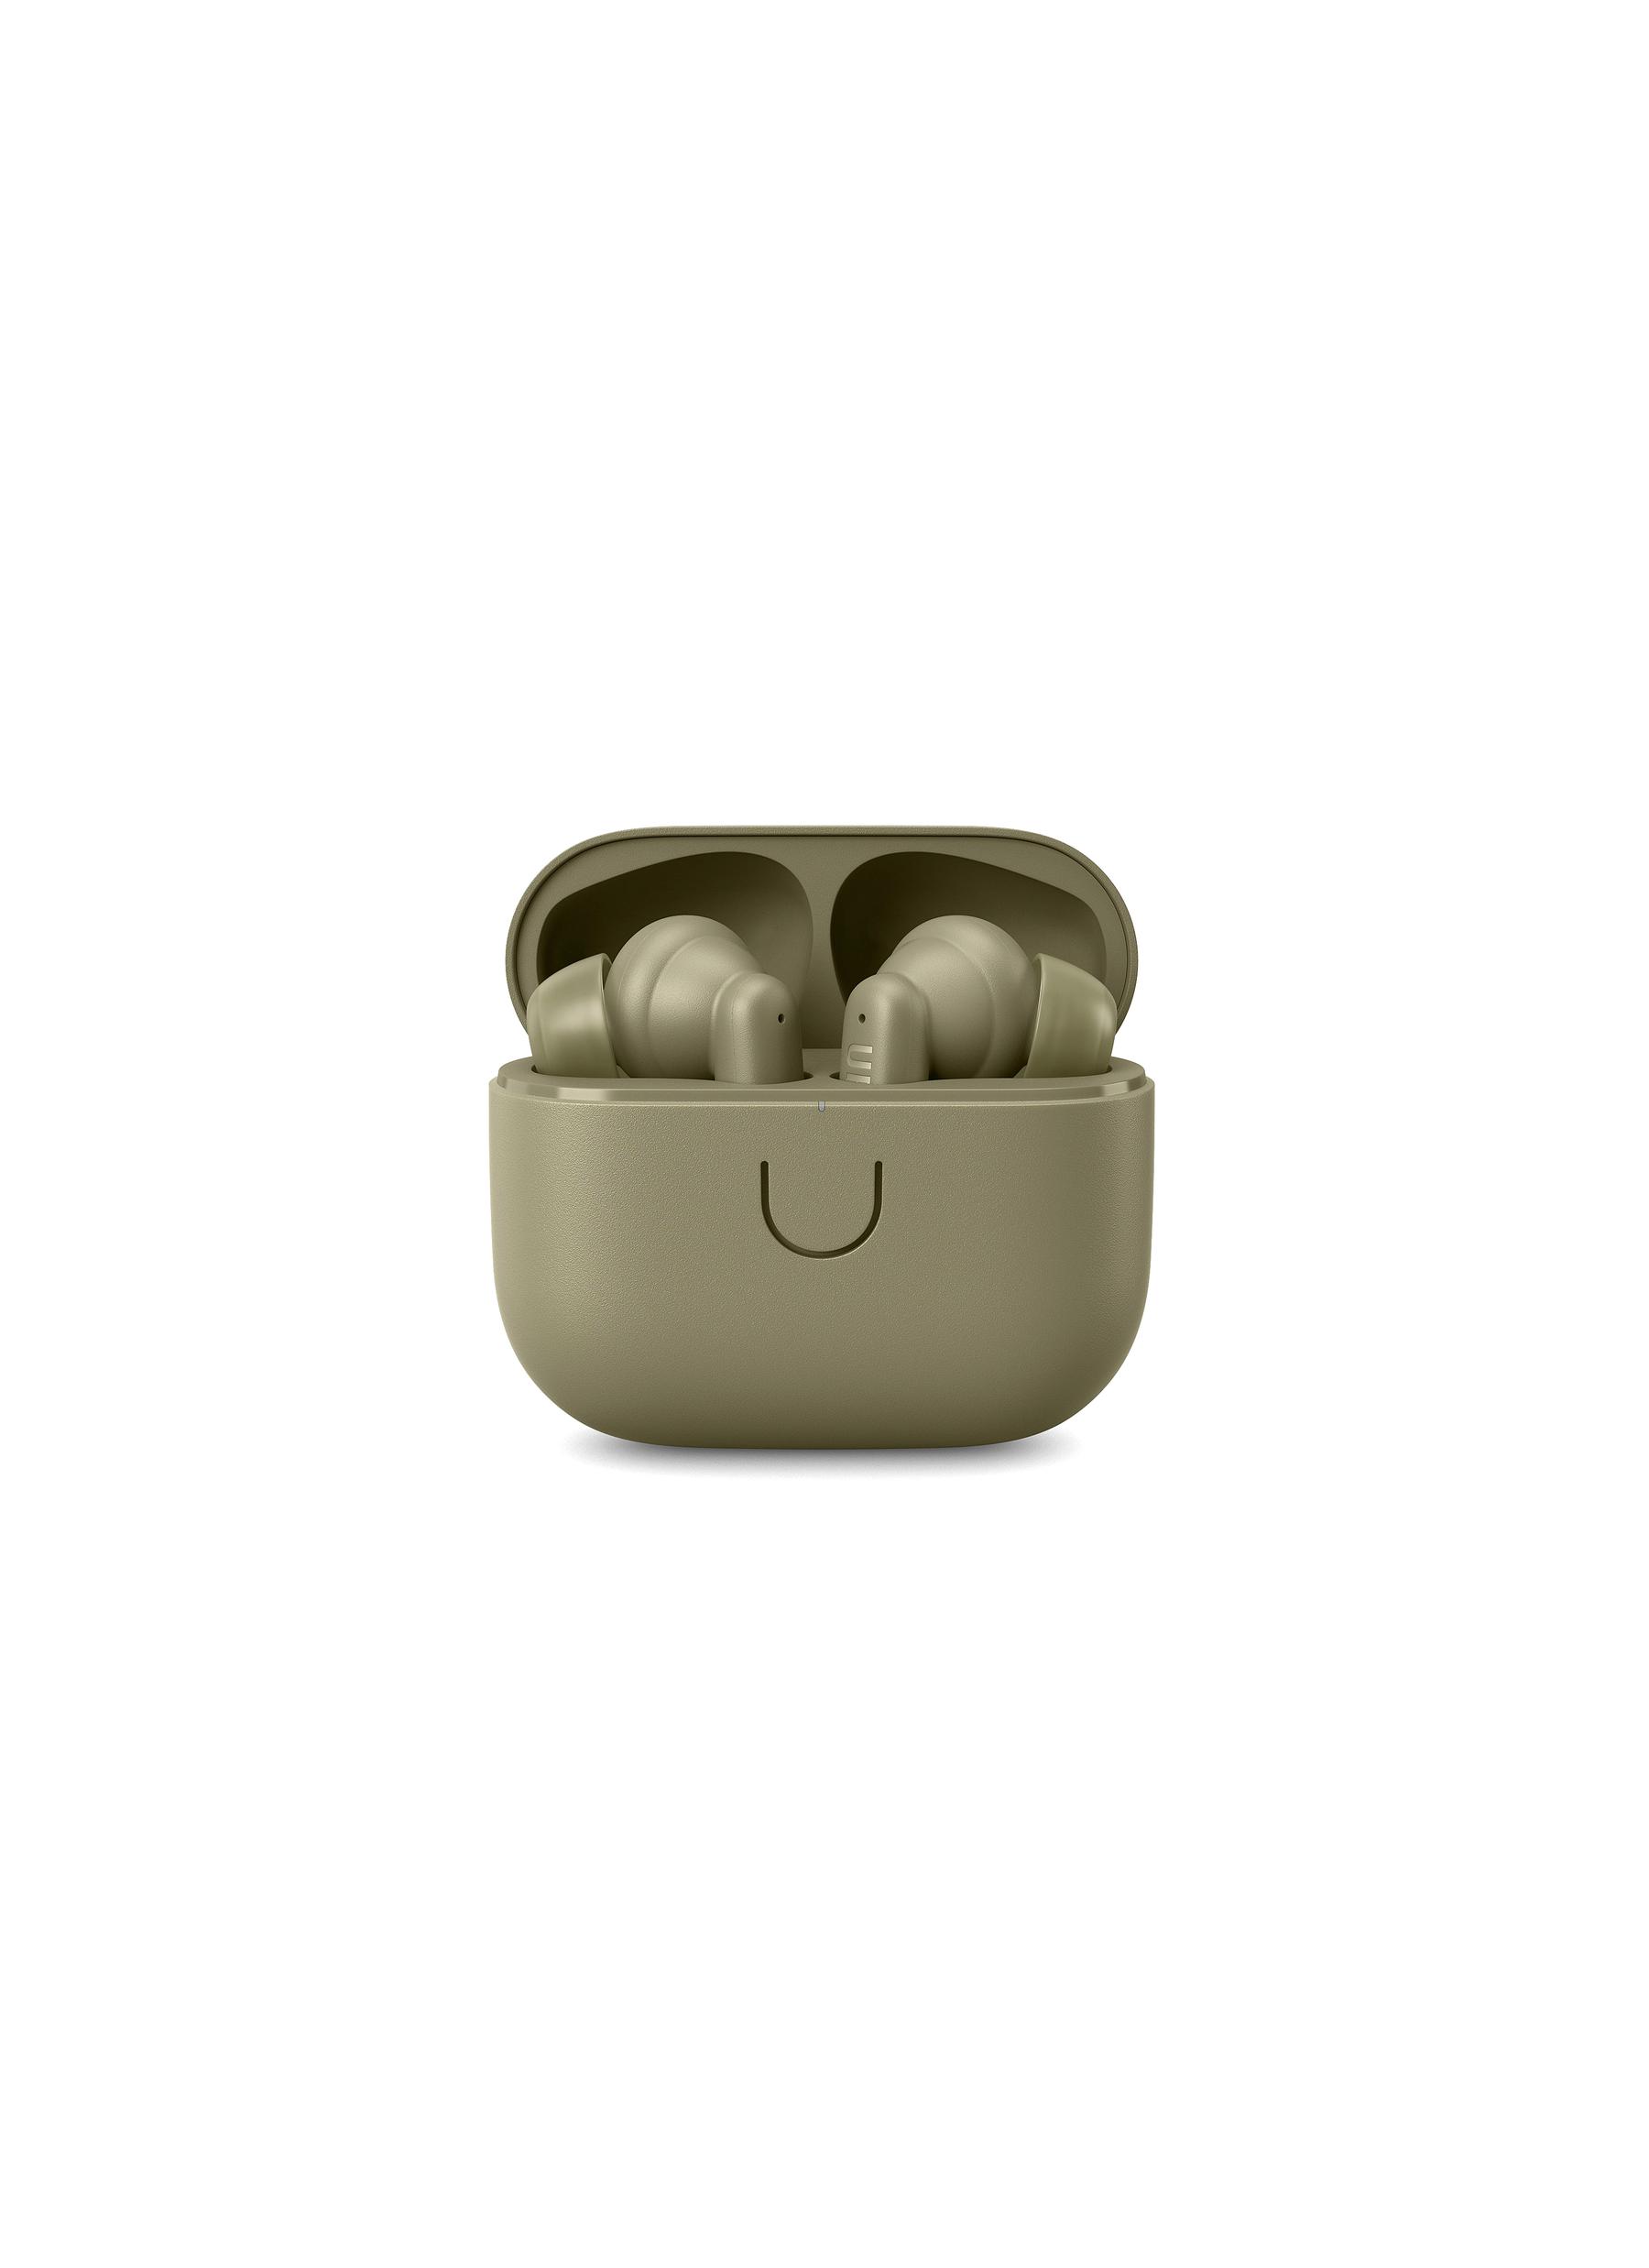 BOO TIP TRUE WIRELESS EARBUDS - ALMOST GREEN